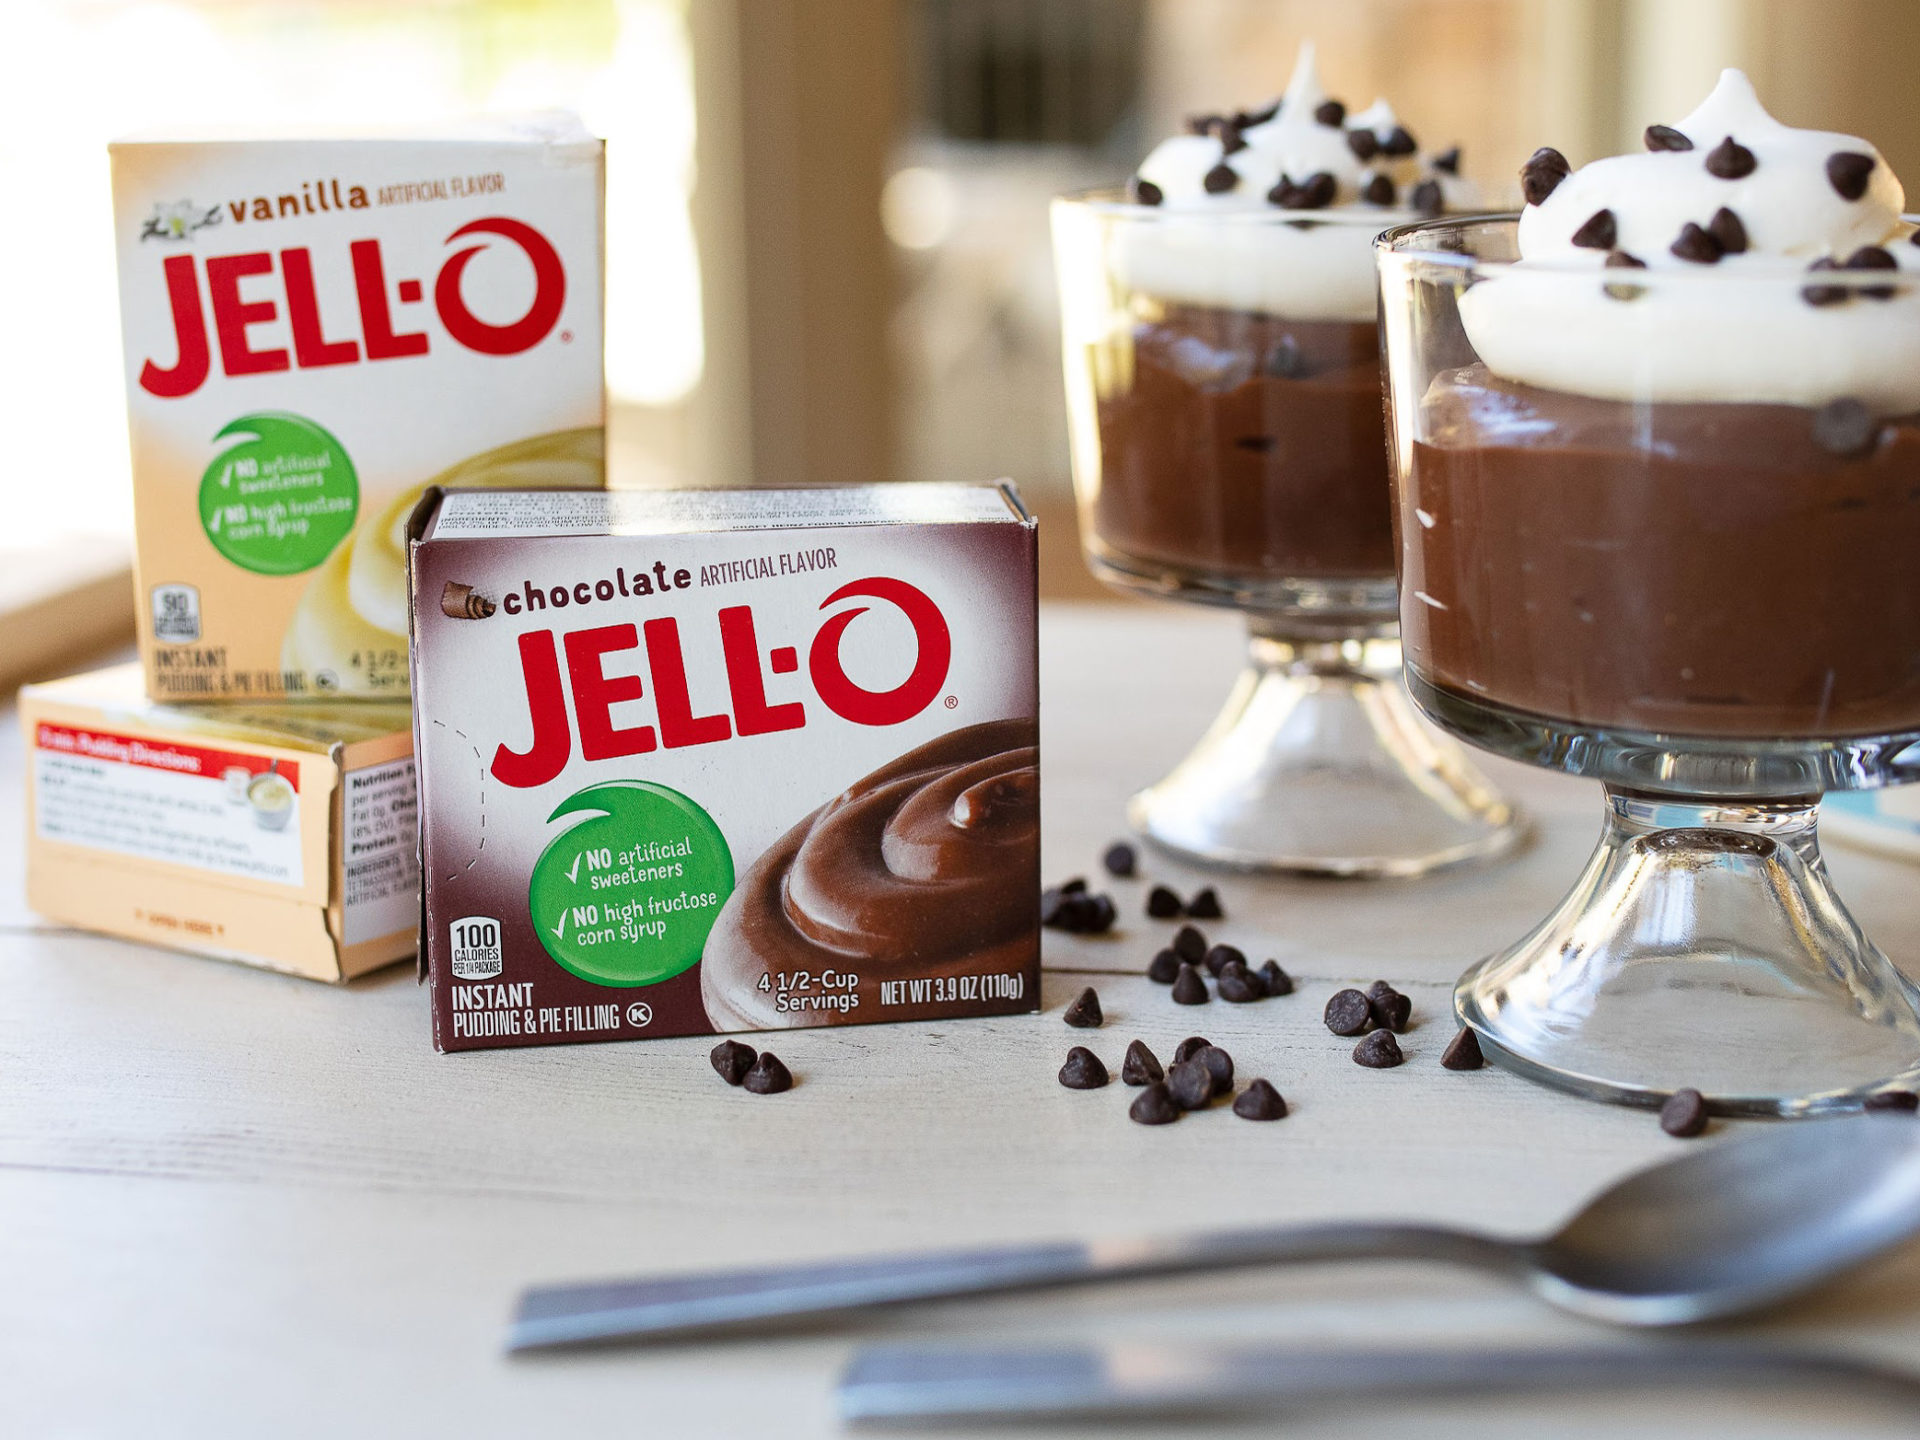 Get Jell-O Pudding And Gelatin Just $1.10 At Kroger